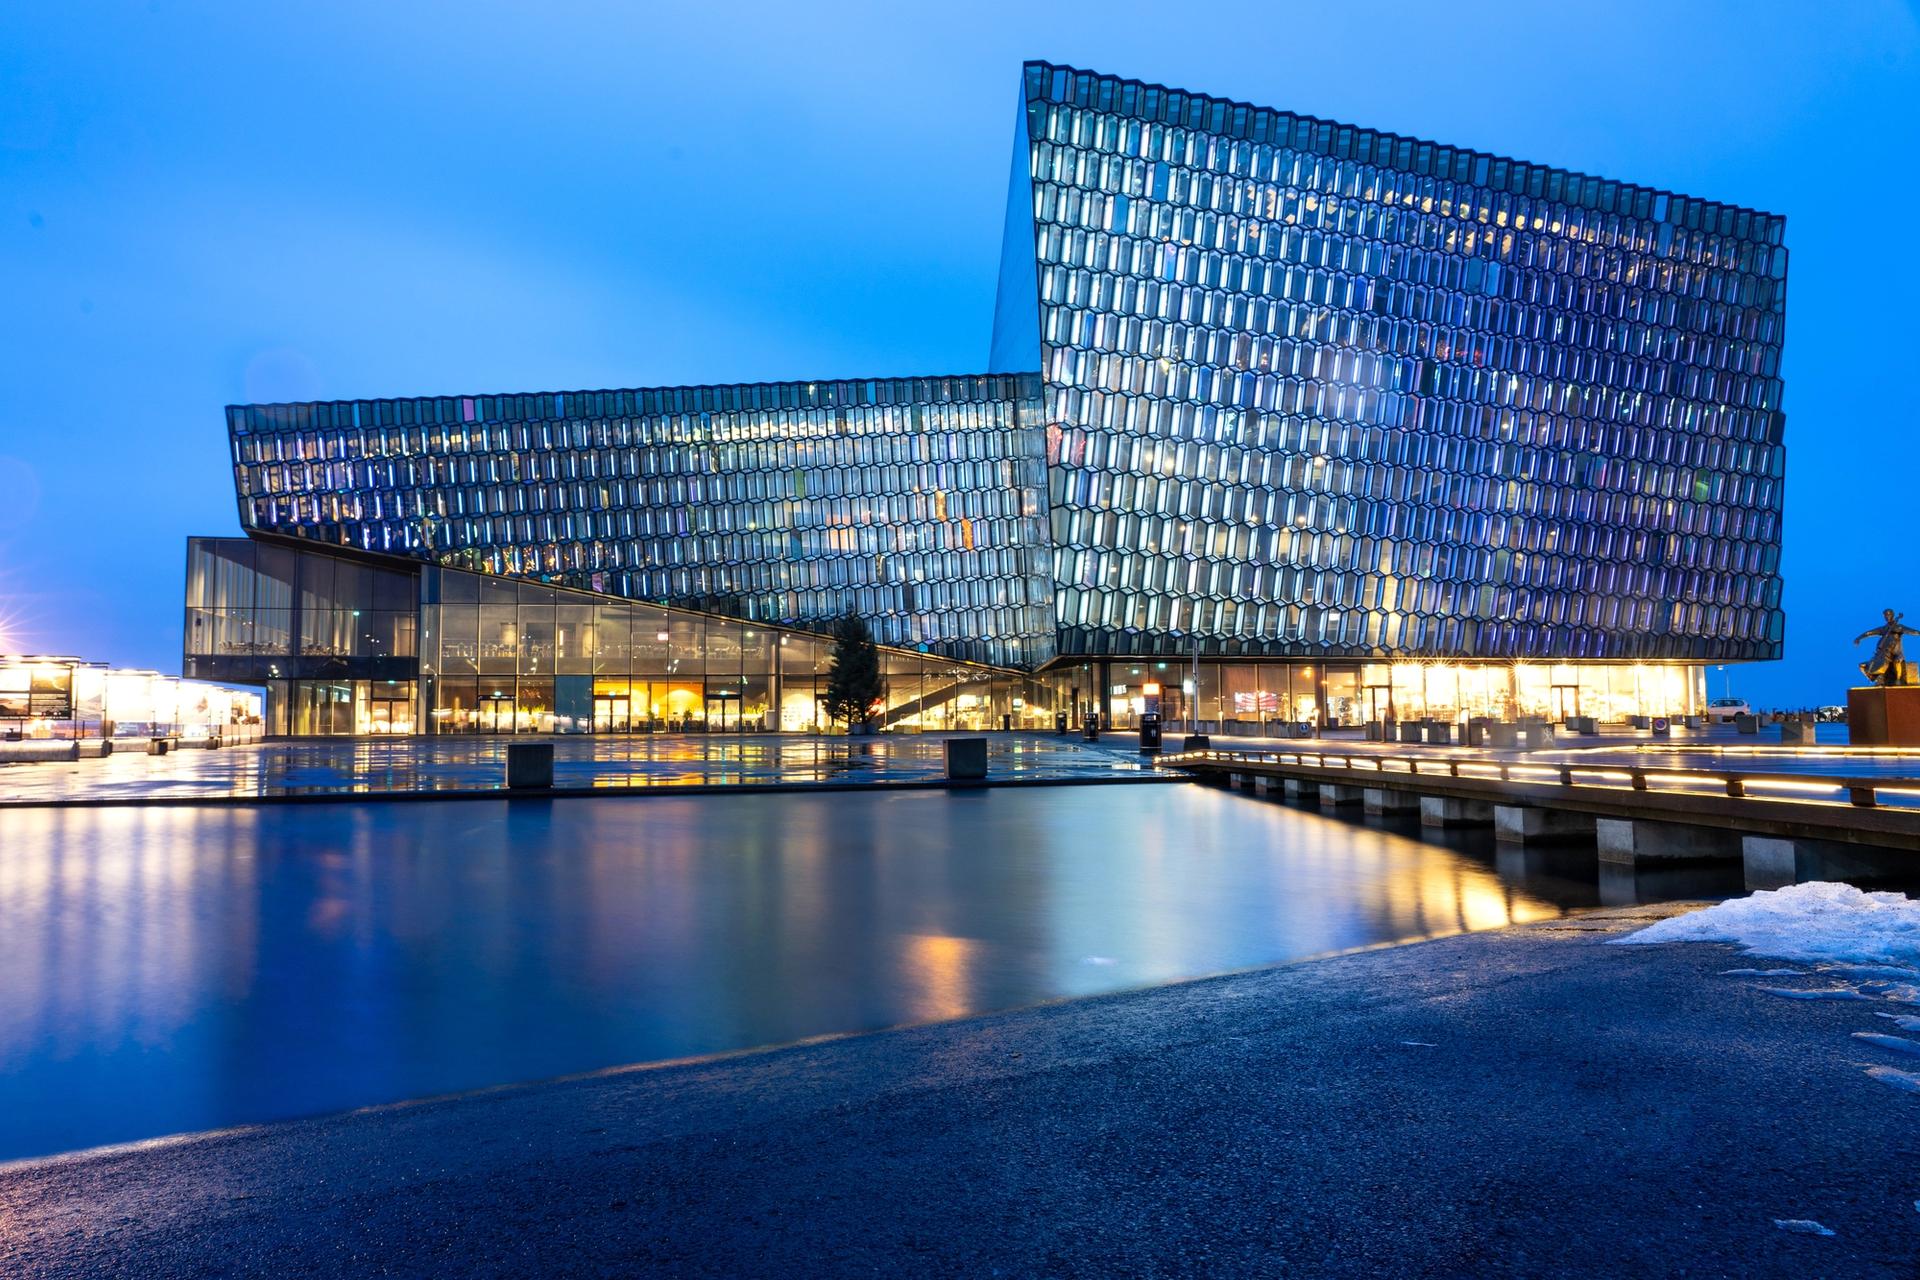 Harpa Concert Hall with its distinctive geometric glass facade in Reykjavík